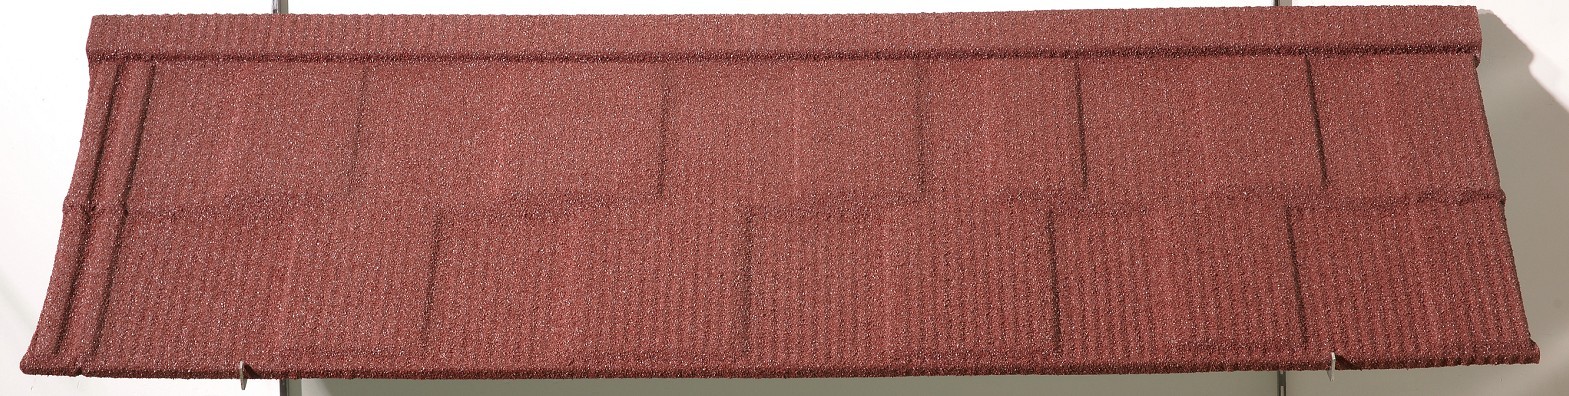 New Sunlight Roof top wood shake roof tiles supply for School-6